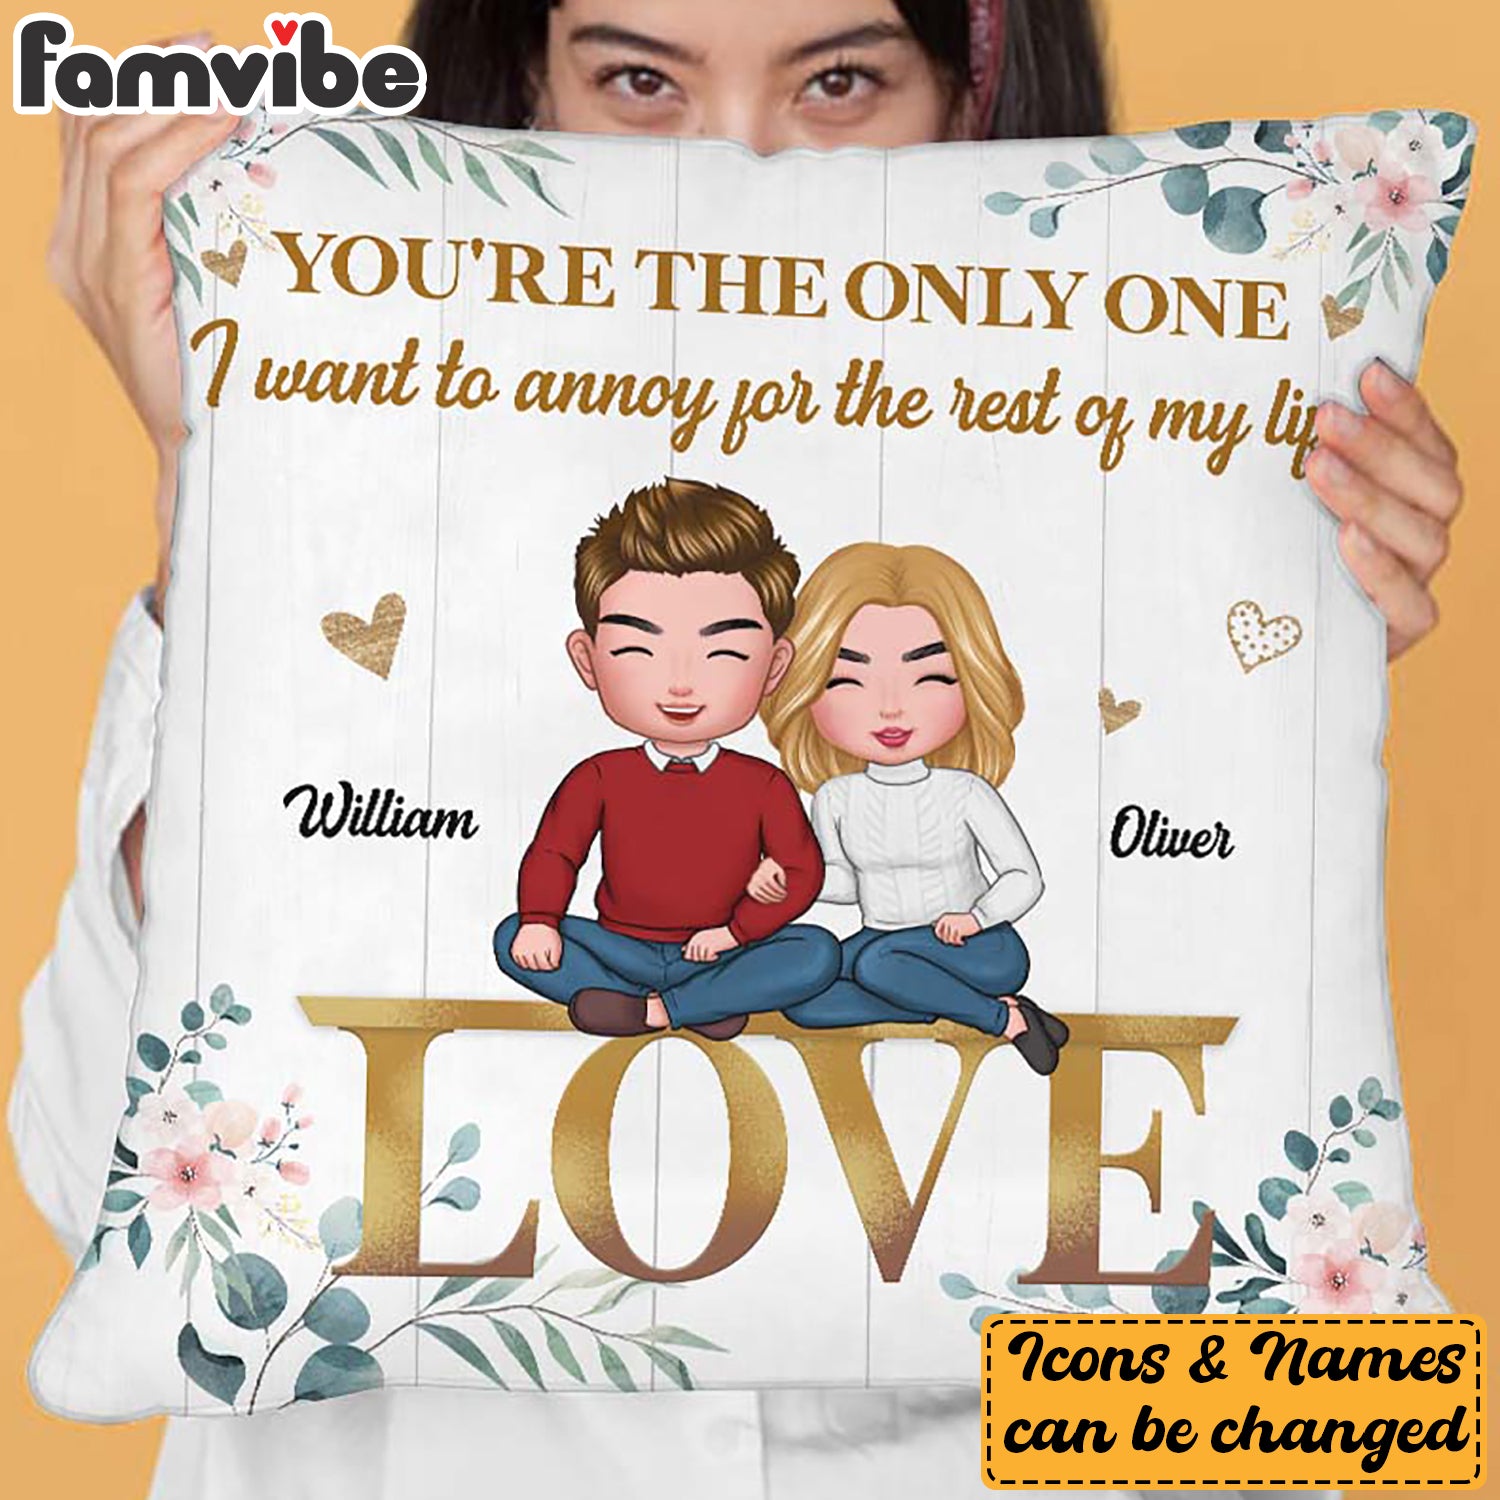 Personalized I Want To Annoy You Couple Pillow DB101 23O28 Primary Mockup